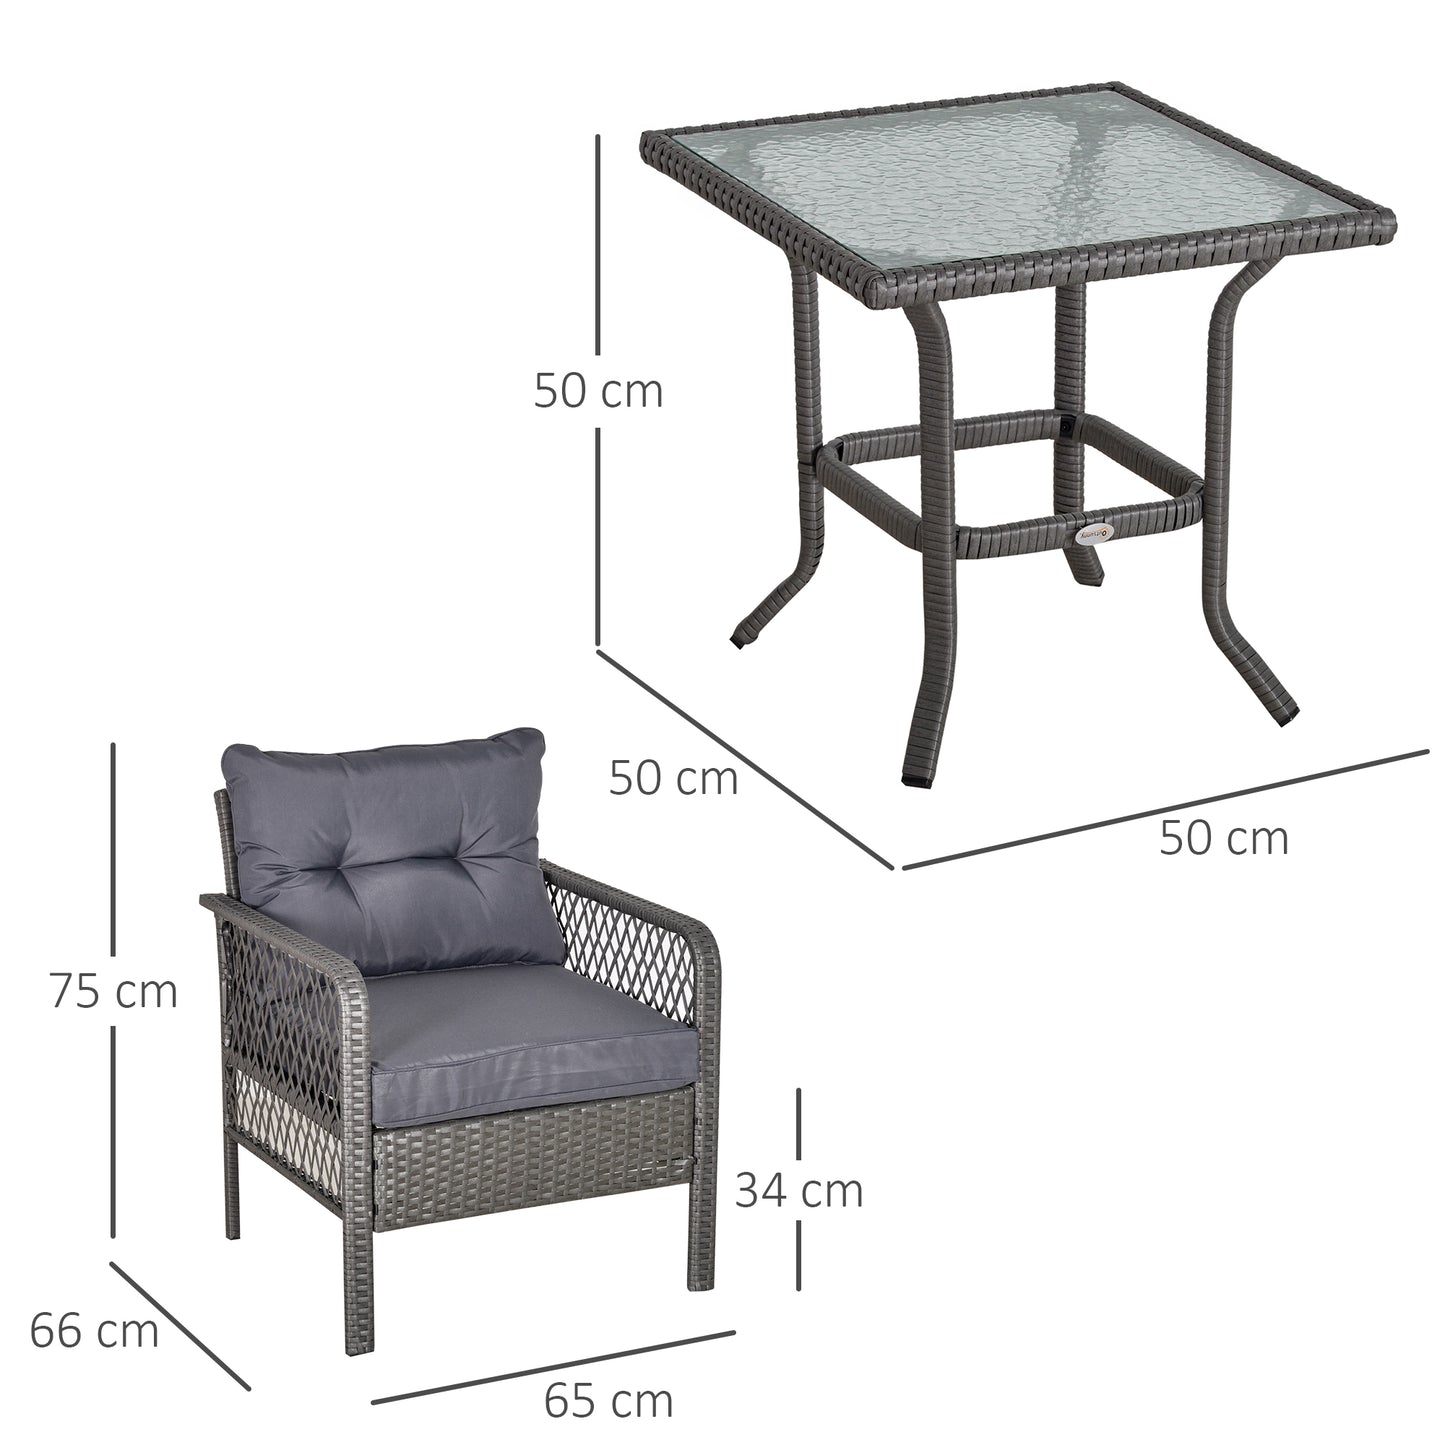 Outsunny 2 Seater Patio Wicker Coffee Table Set, Bistro Conversation Furniture w/ Cushion for Patio, Yard, Porch, Grey PCS Set with